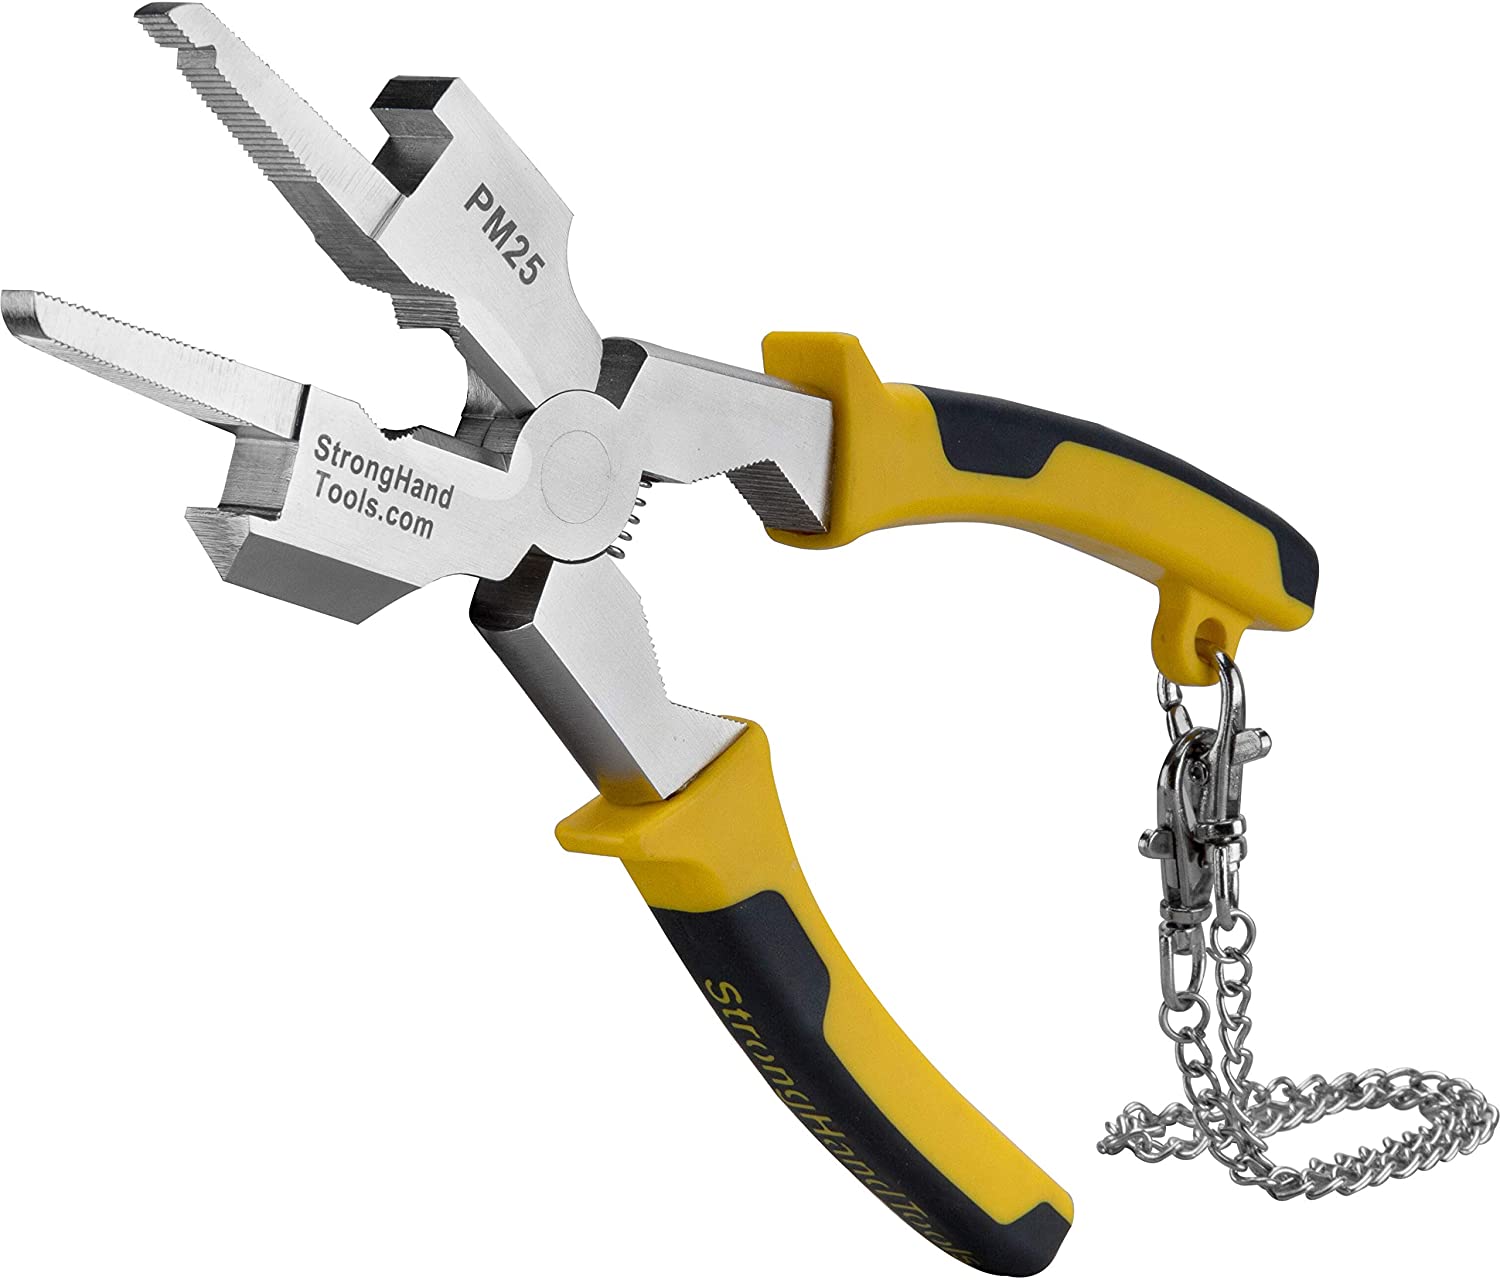 Strong Hand Tools - Deluxe+ MIG Welding Pliers - PM25